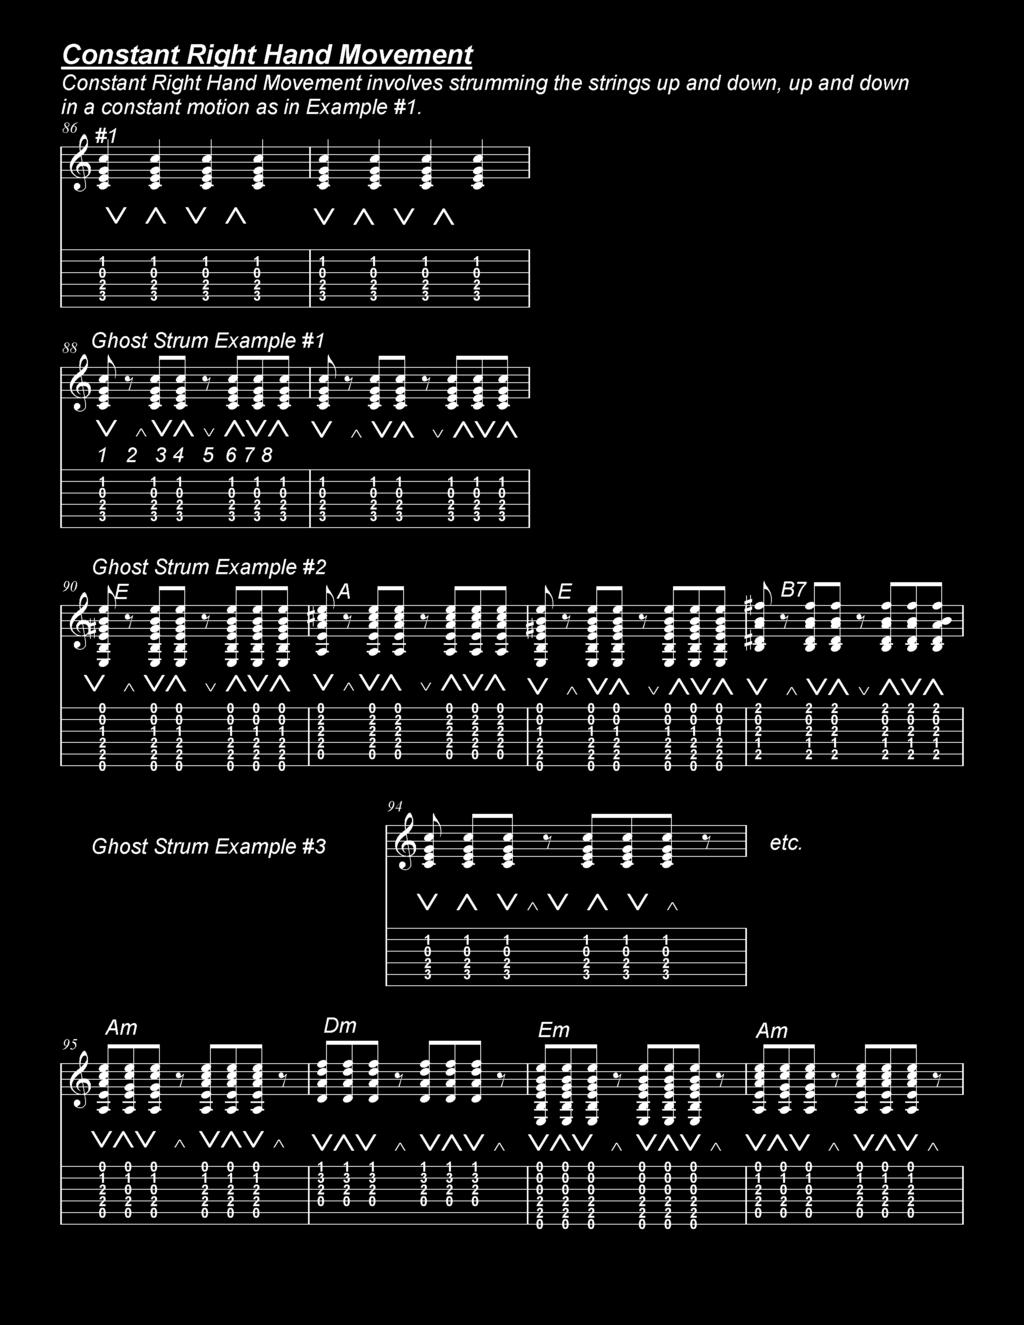 Ghost Strum Exercises: In these exercises use constant right hand movement up and down up and down.